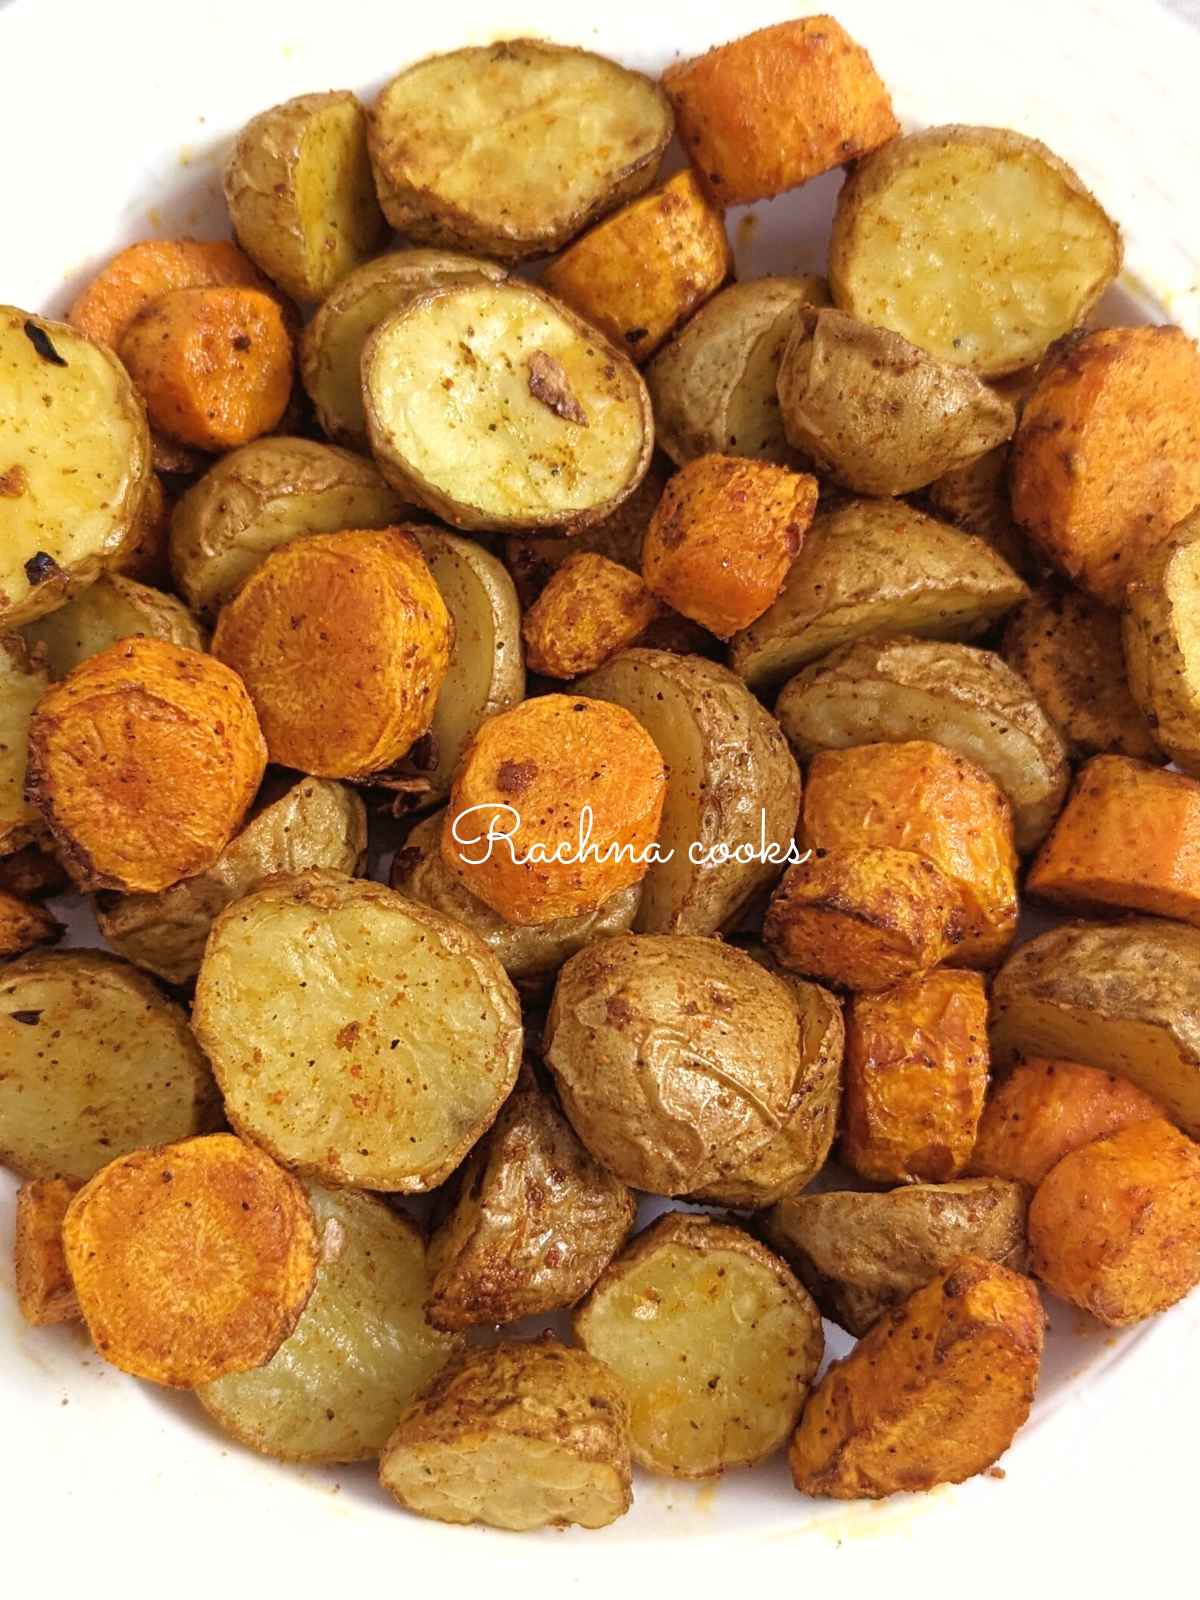 Roasted air fryer carrots and potatoes served on a white plate